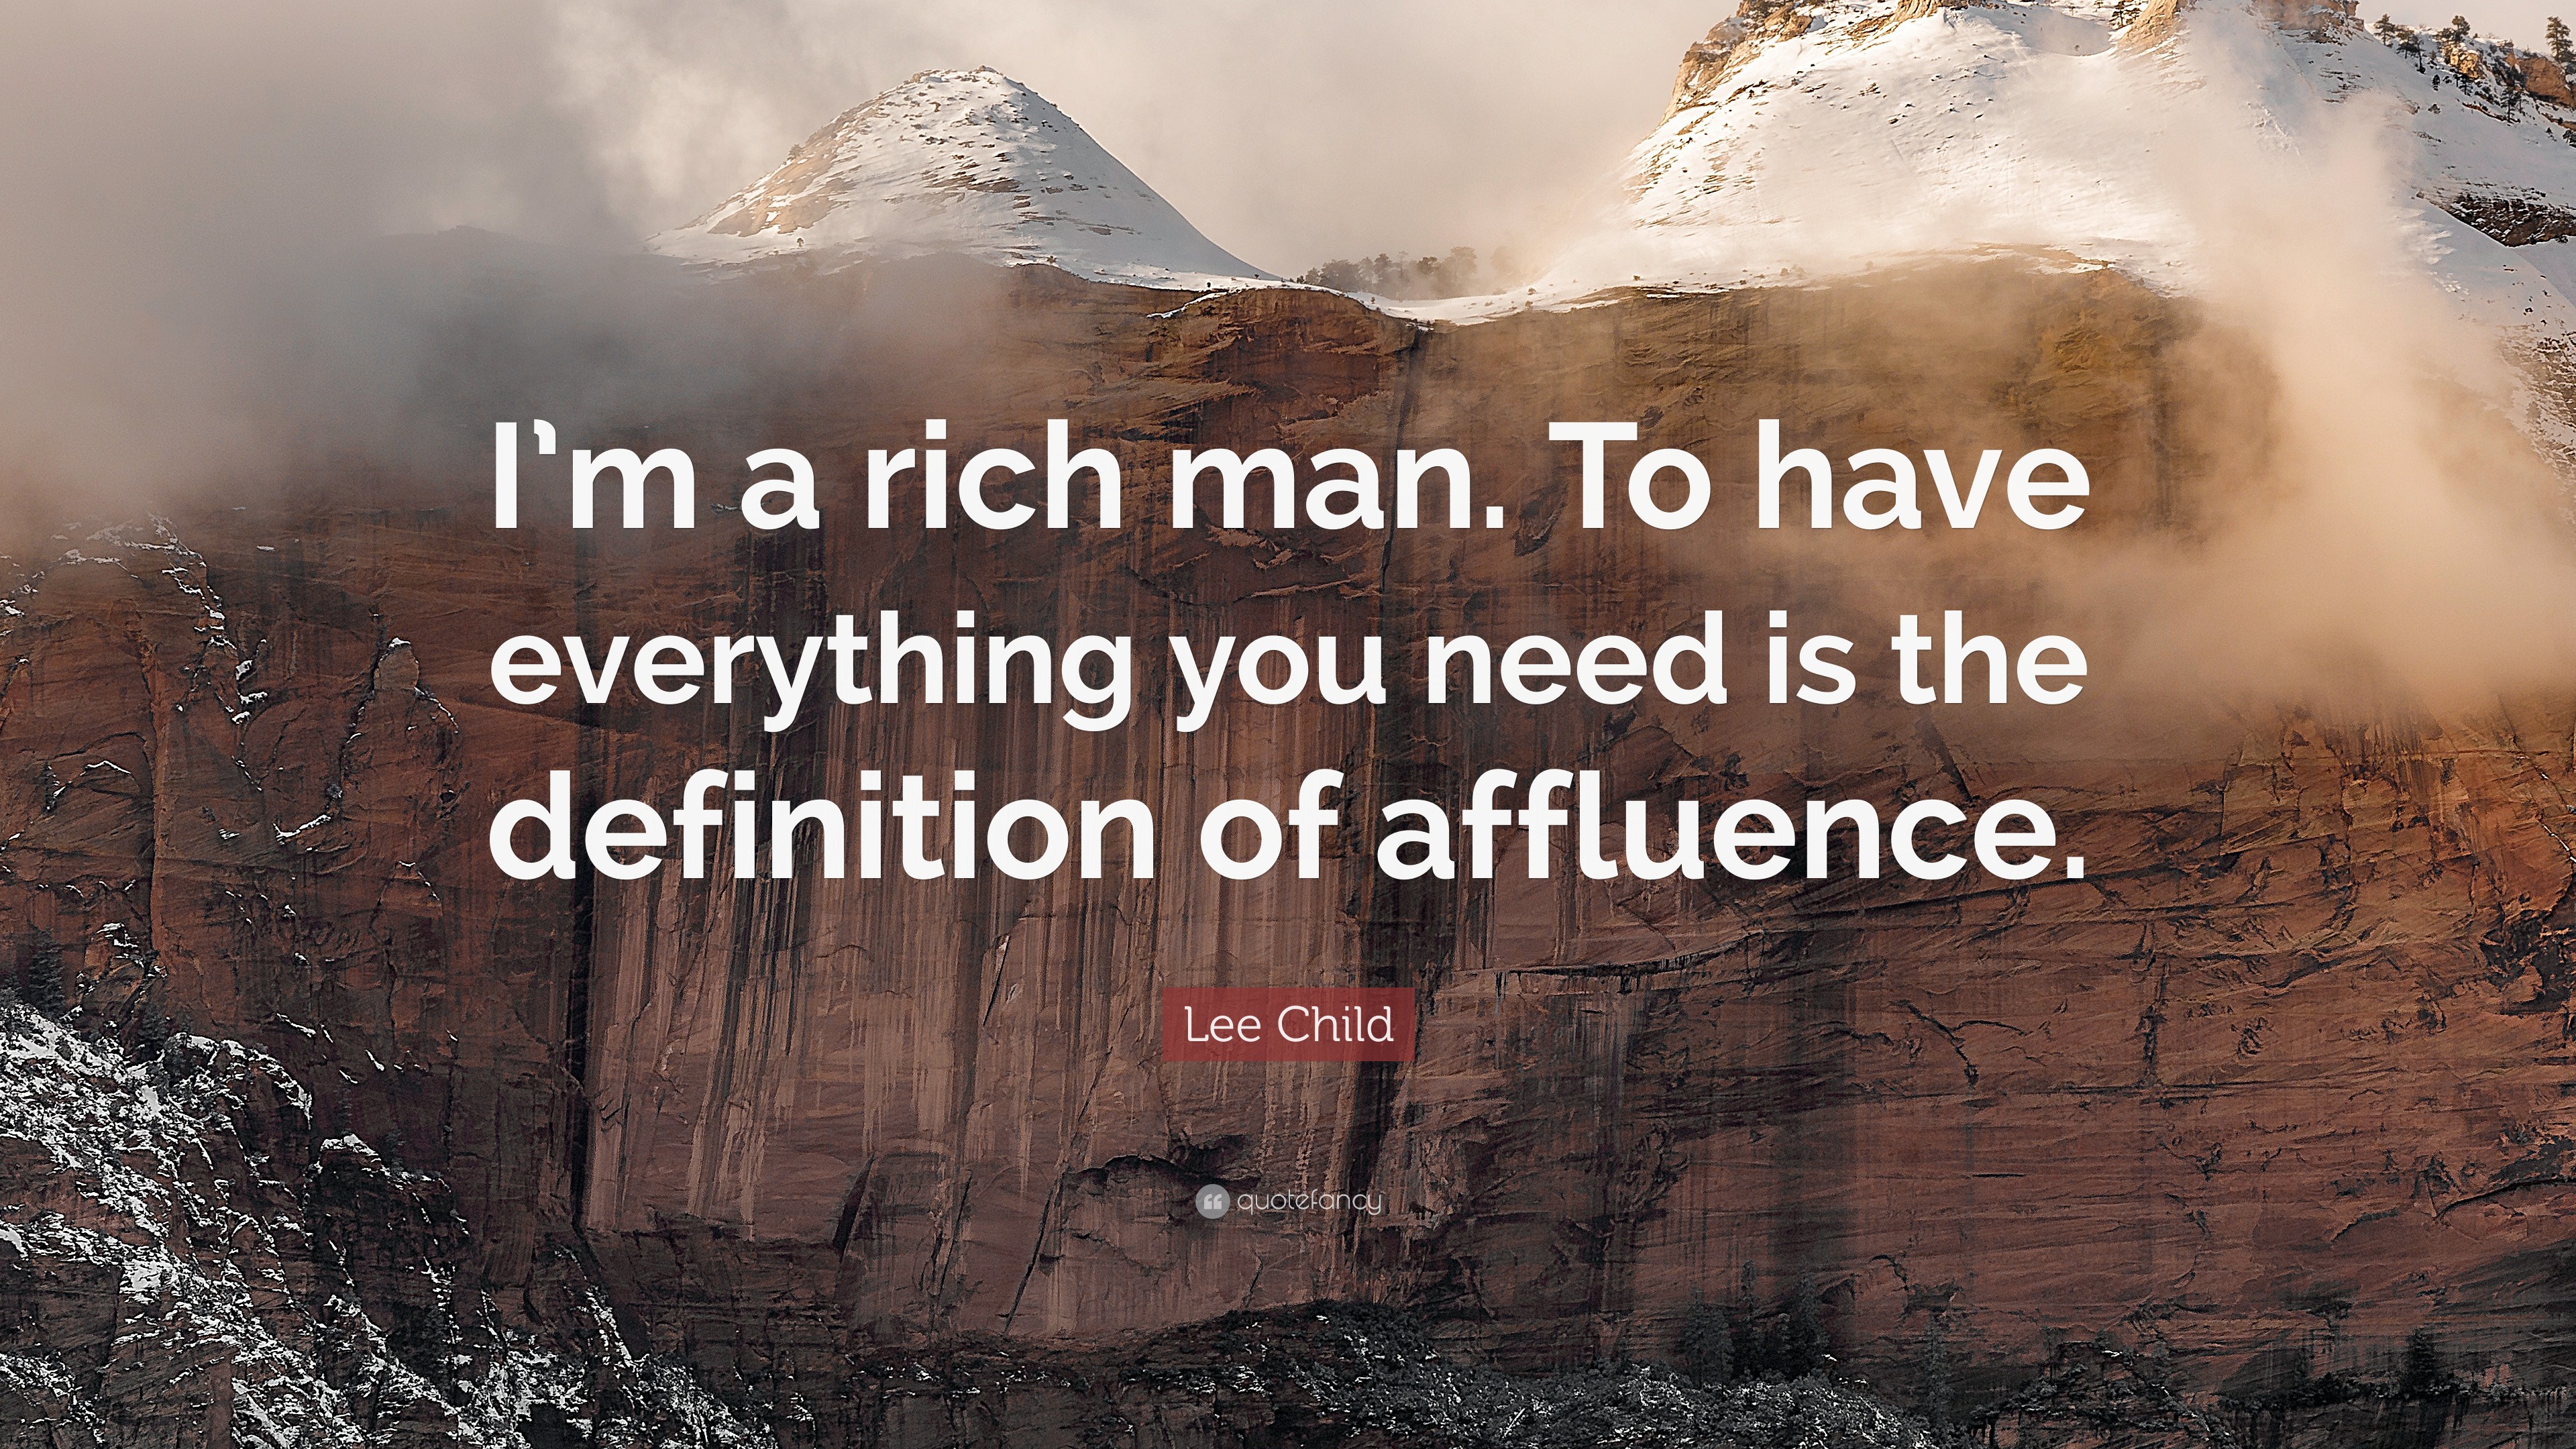 Lee Child Quote: “I'm a rich man. To have everything you need is the  definition